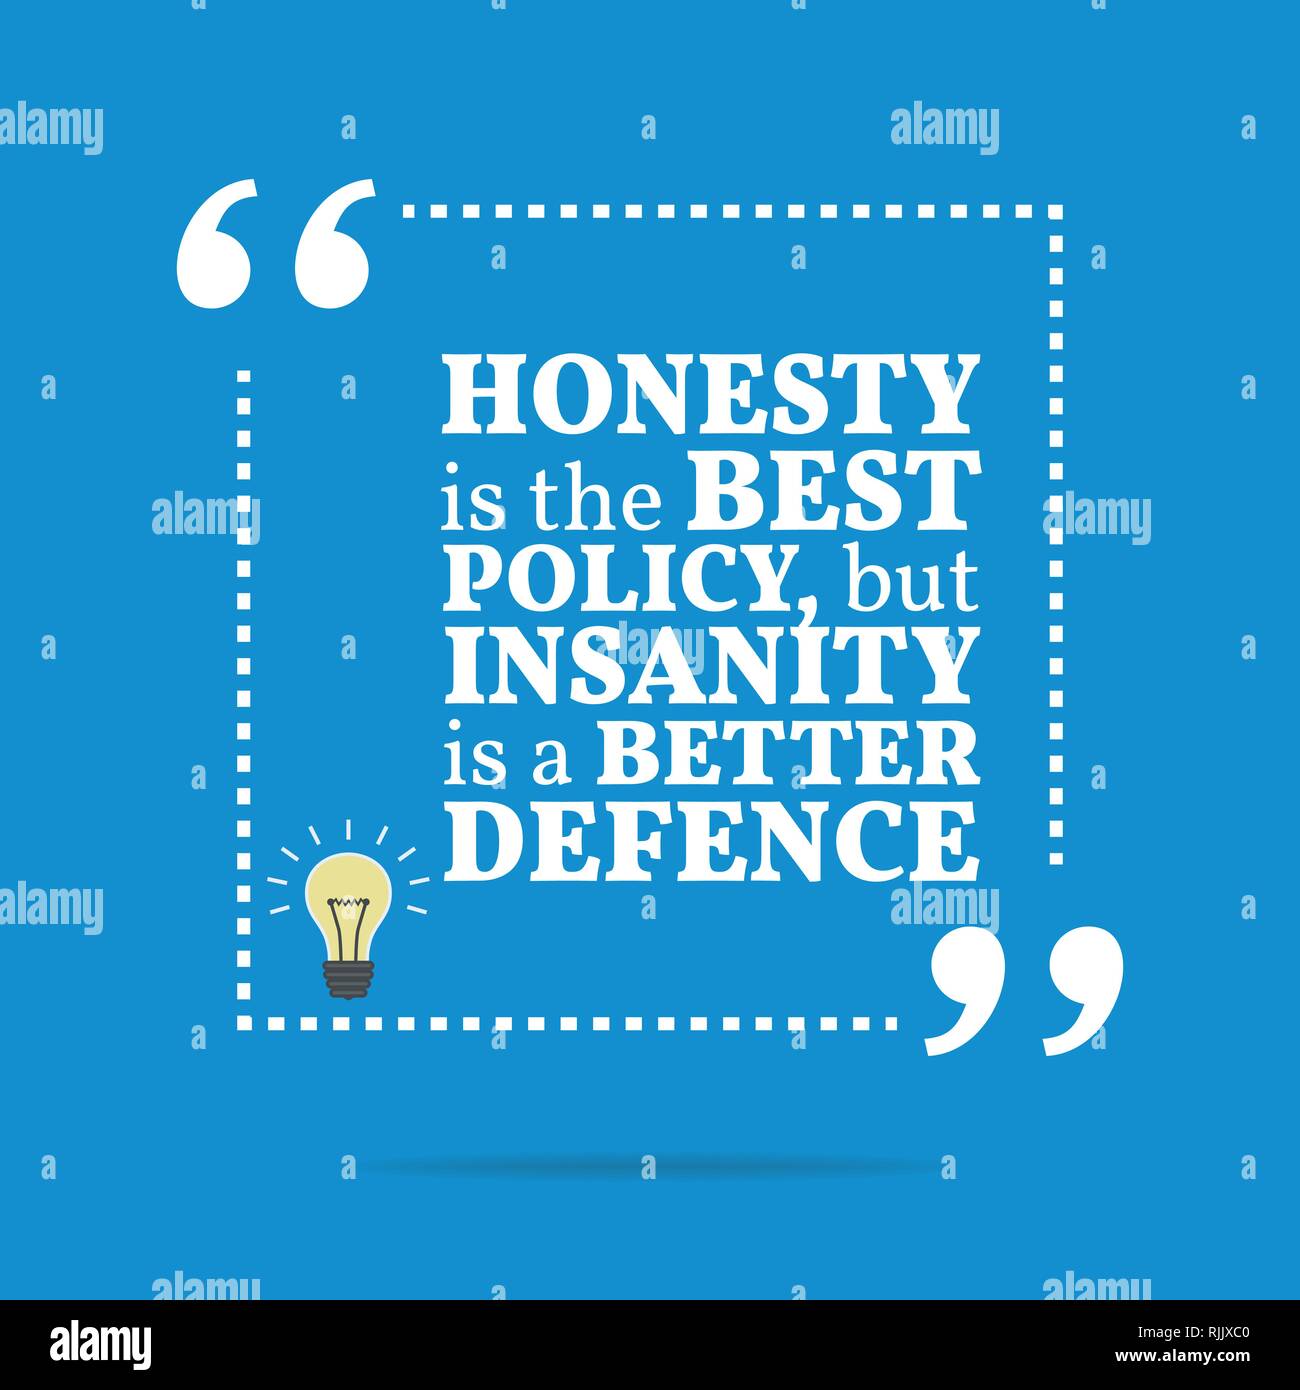 honesty is the best policy and other quotes